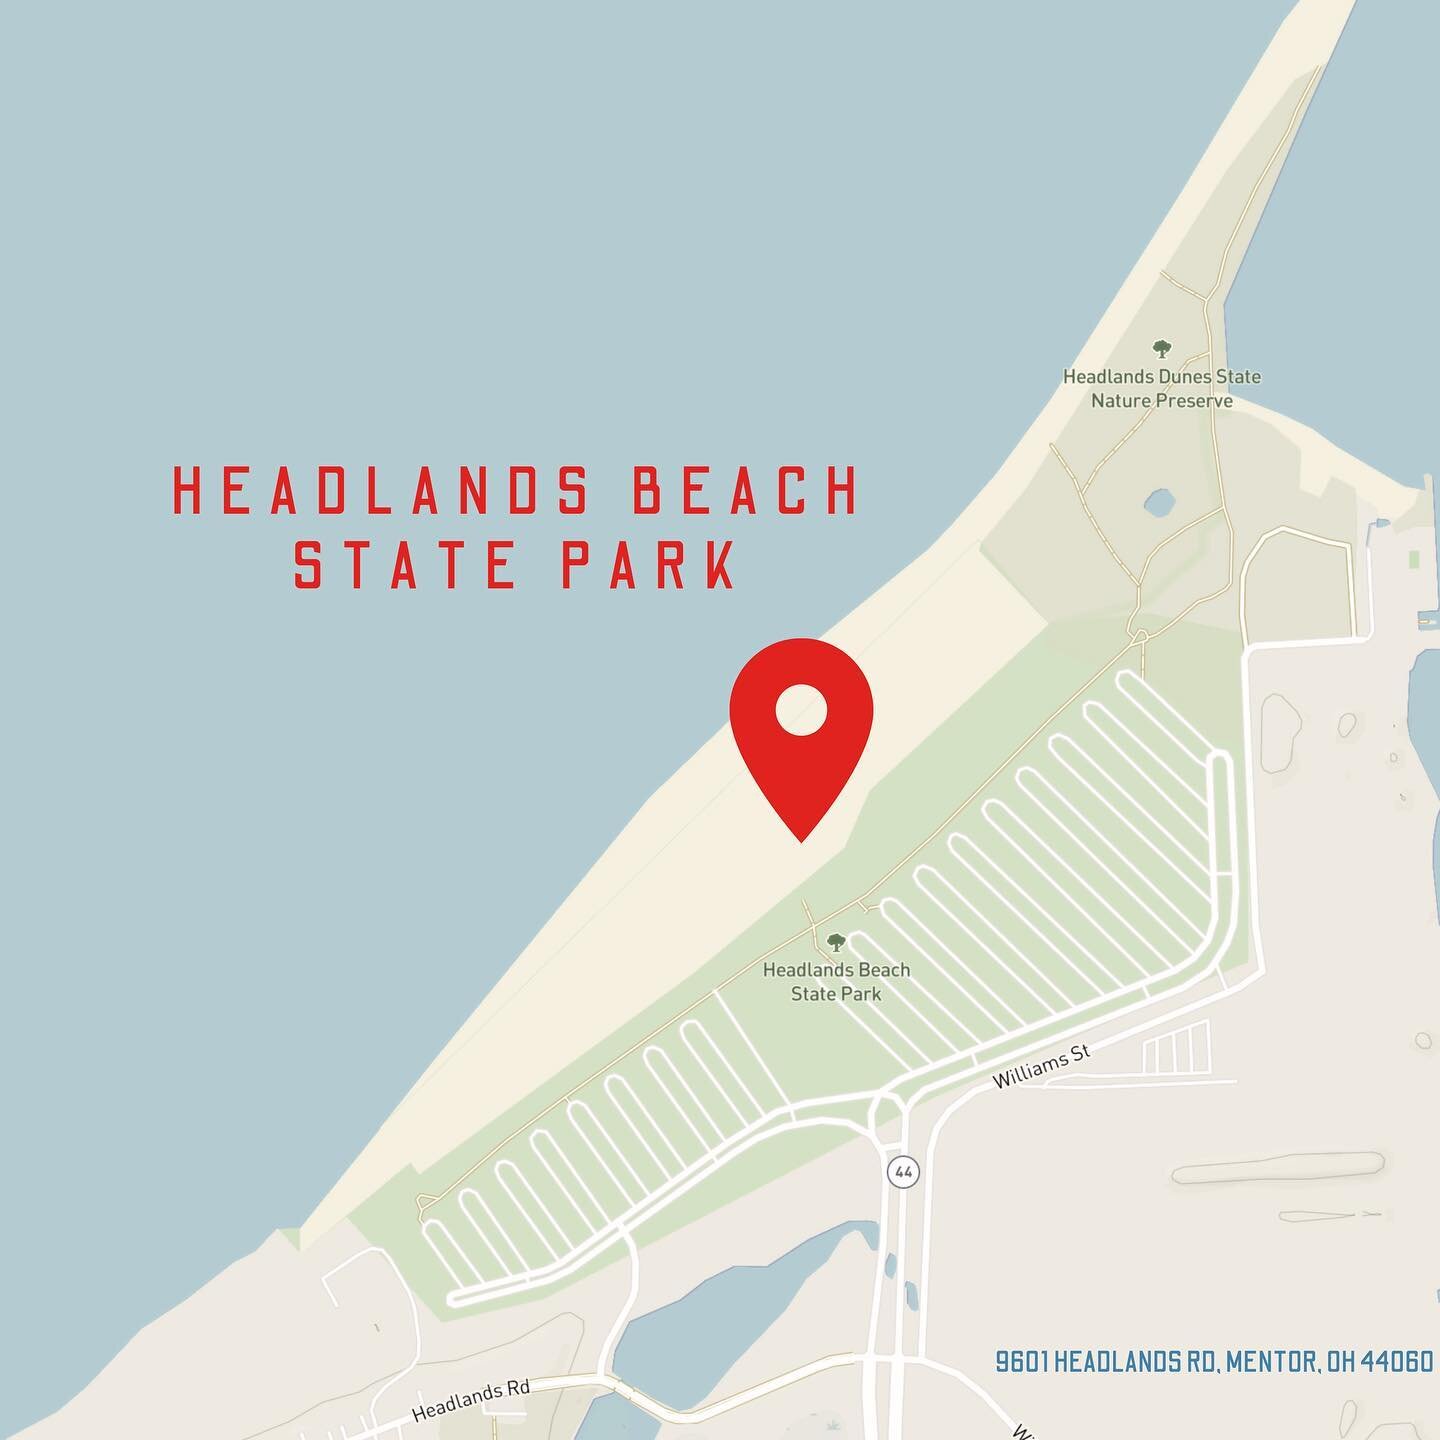 Headlands Beach State Park or as I like to call it: &quot;Headlands&quot;

What better location to host a flea market event that promotes local creatives &amp; encourages community? 

I love how open this space is - the parking lots are extra large &